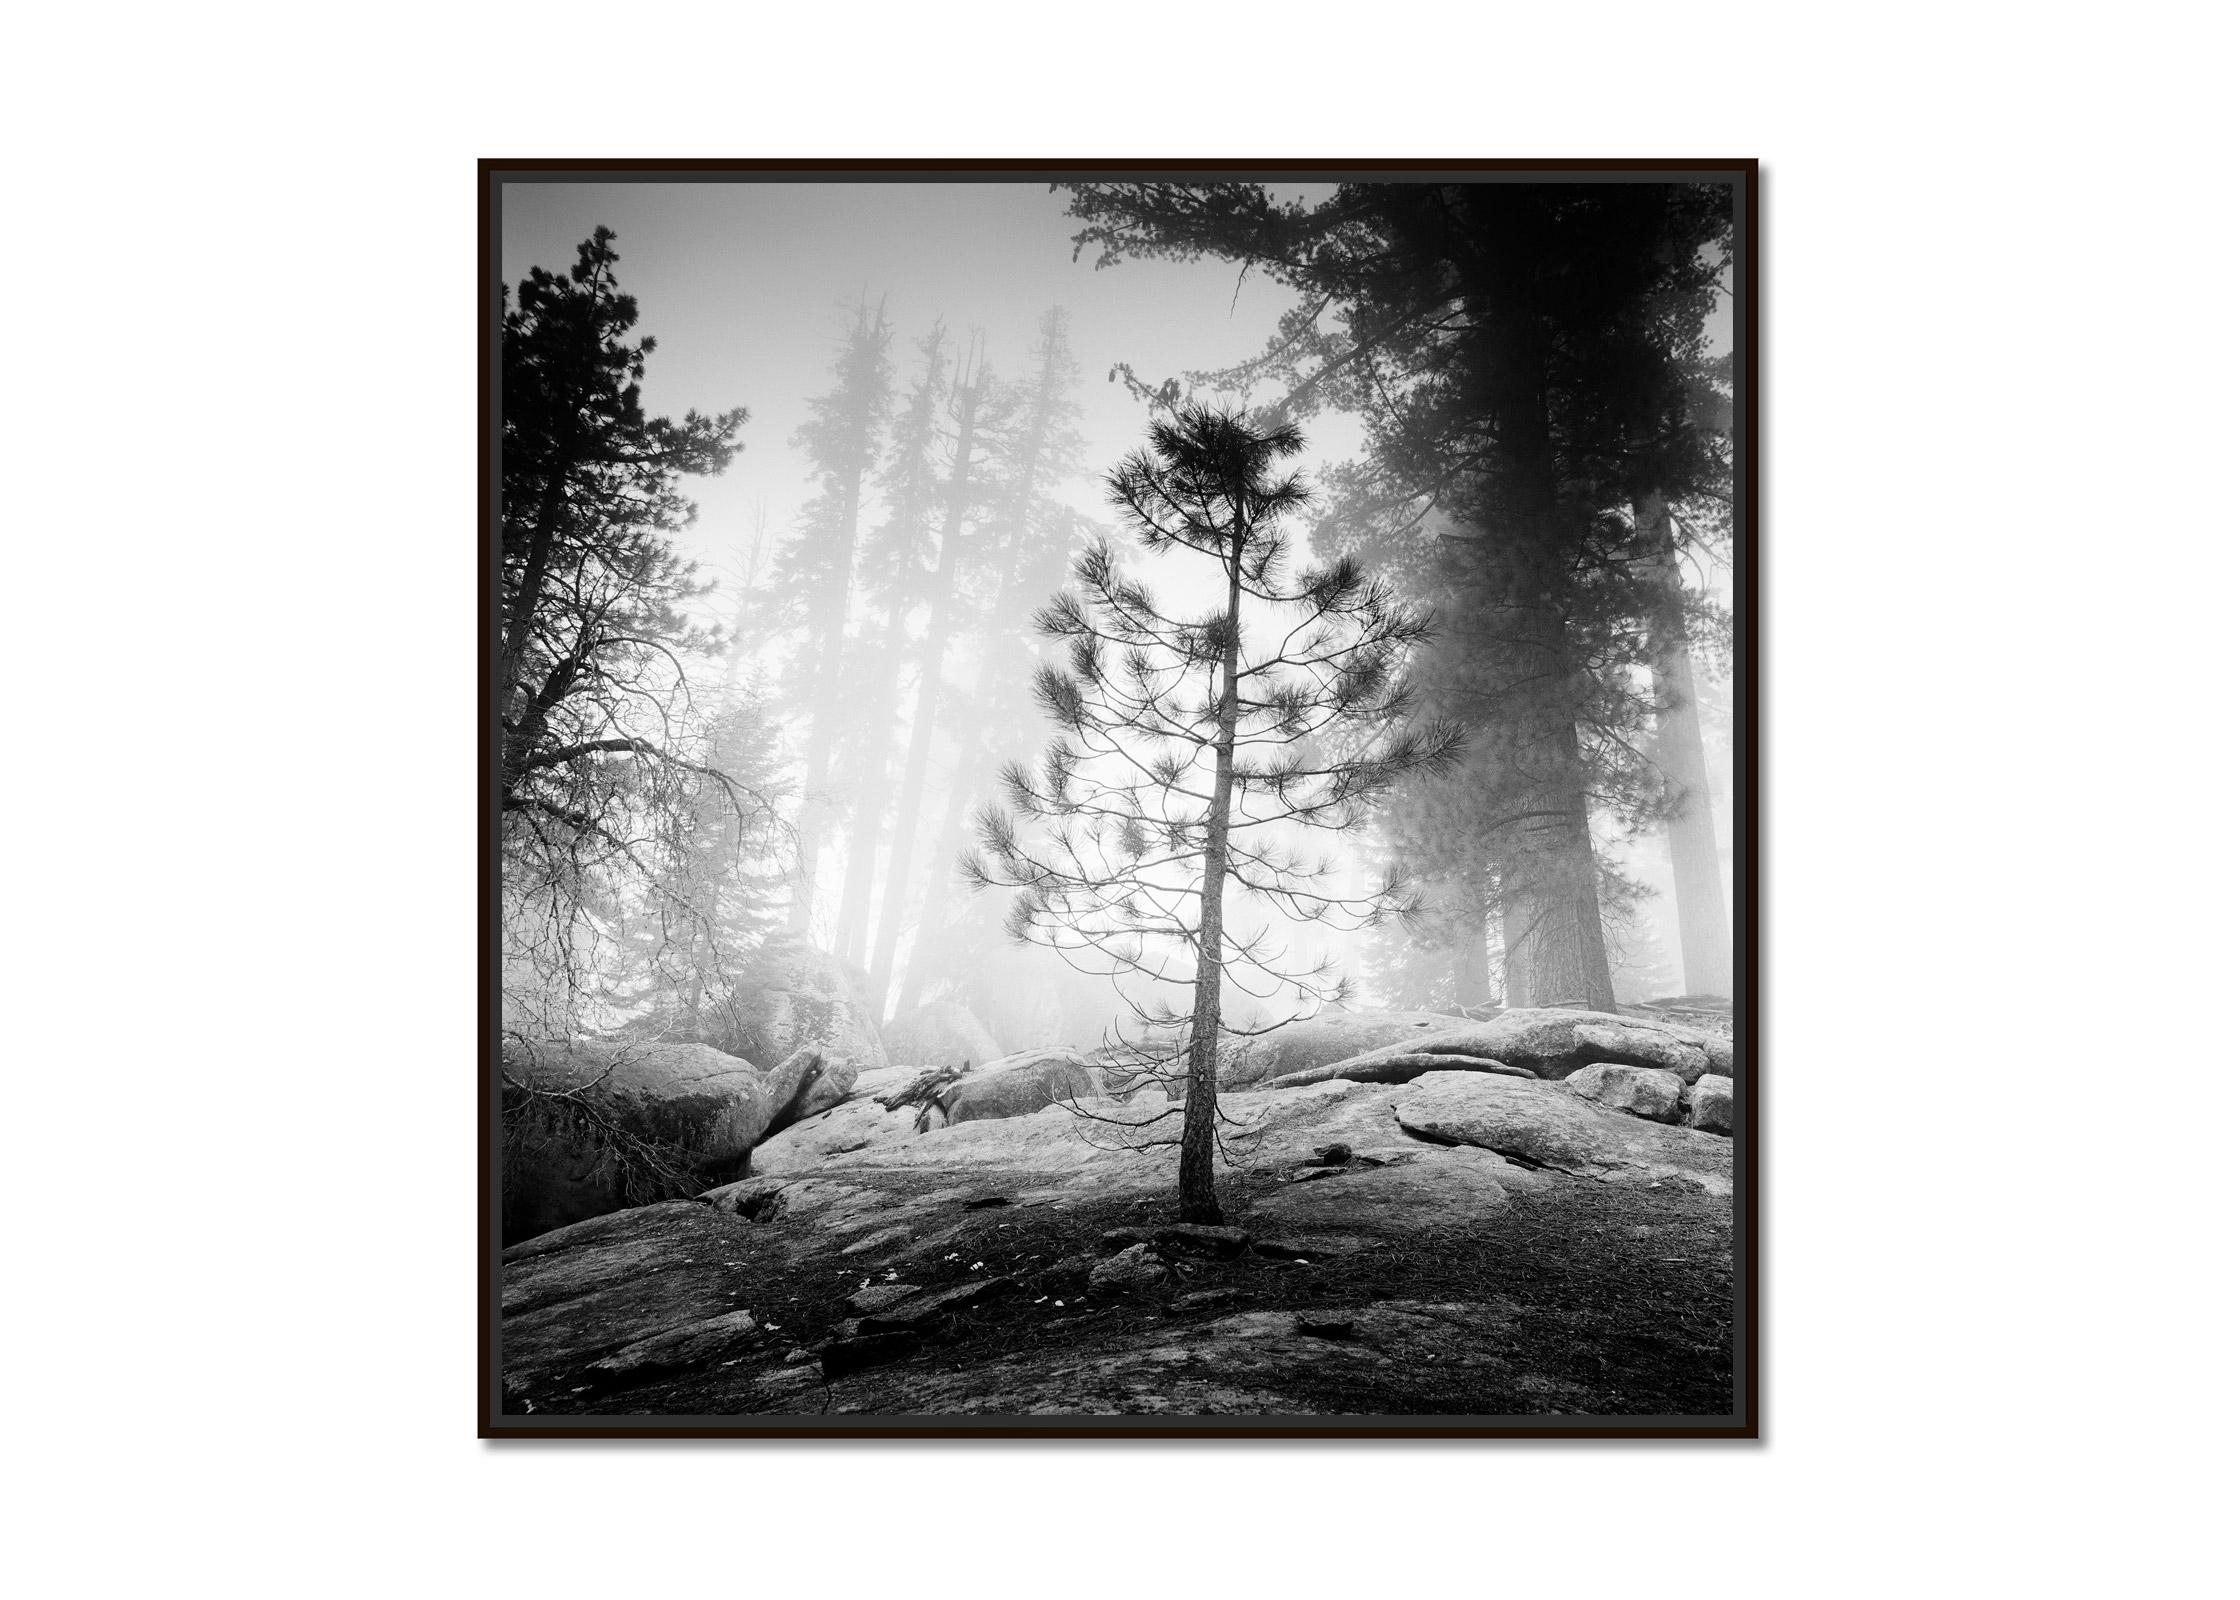 Into the Wild, Redwood, foggy, California, USA, b&w art landscape photography - Photograph by Gerald Berghammer